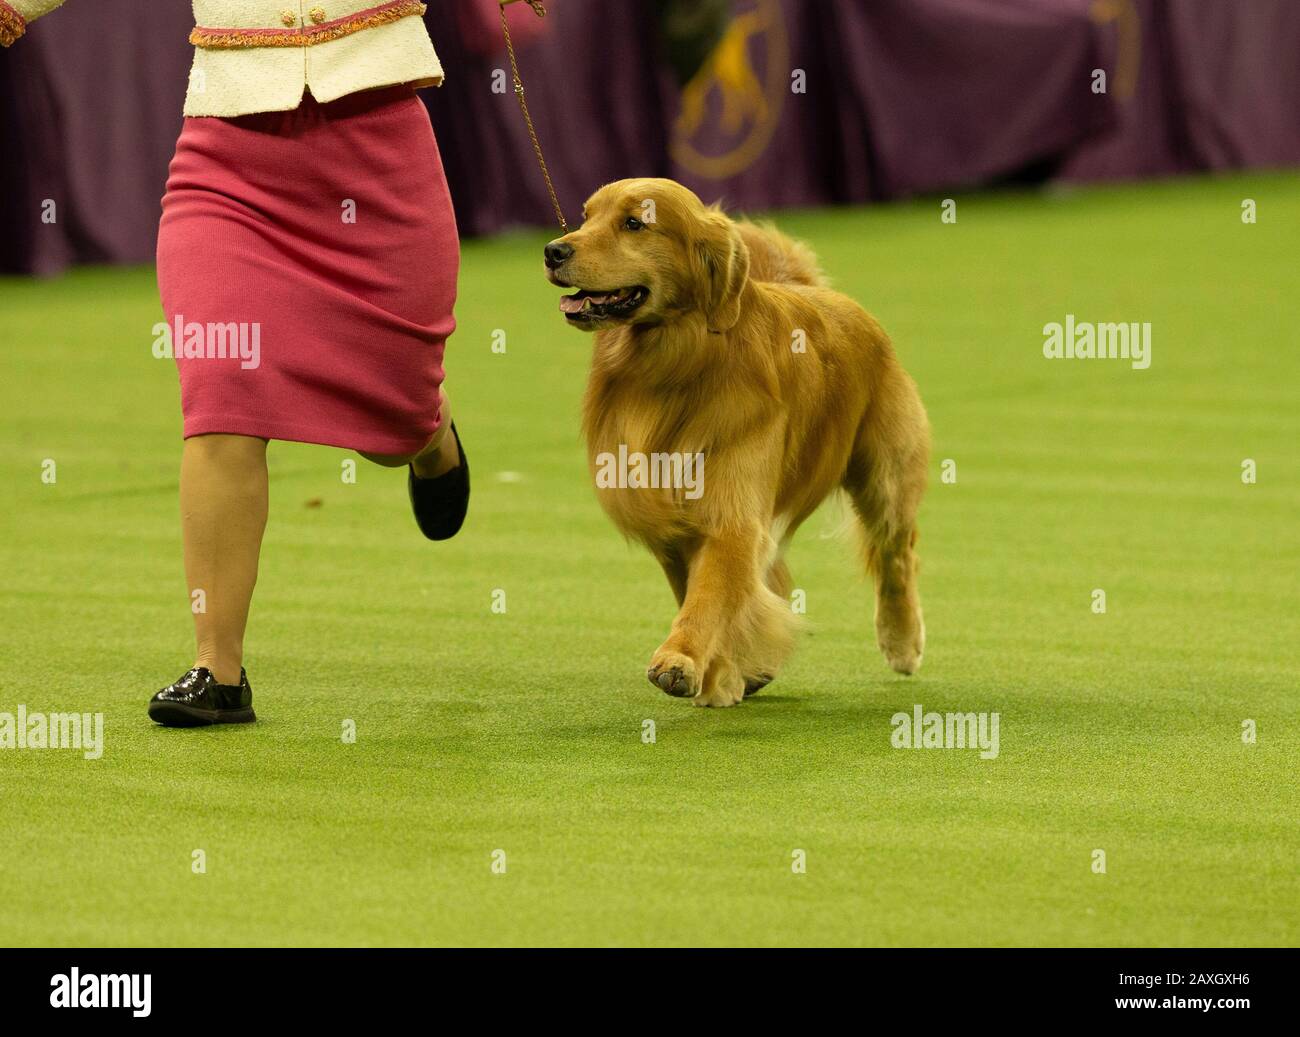 New York, NY - February 11, 2020: Winner of Sporting Group Golden Retriever named Daniel runs during 144th Westminster Kennel Club Dog Show at Madison Square Garden Stock Photo